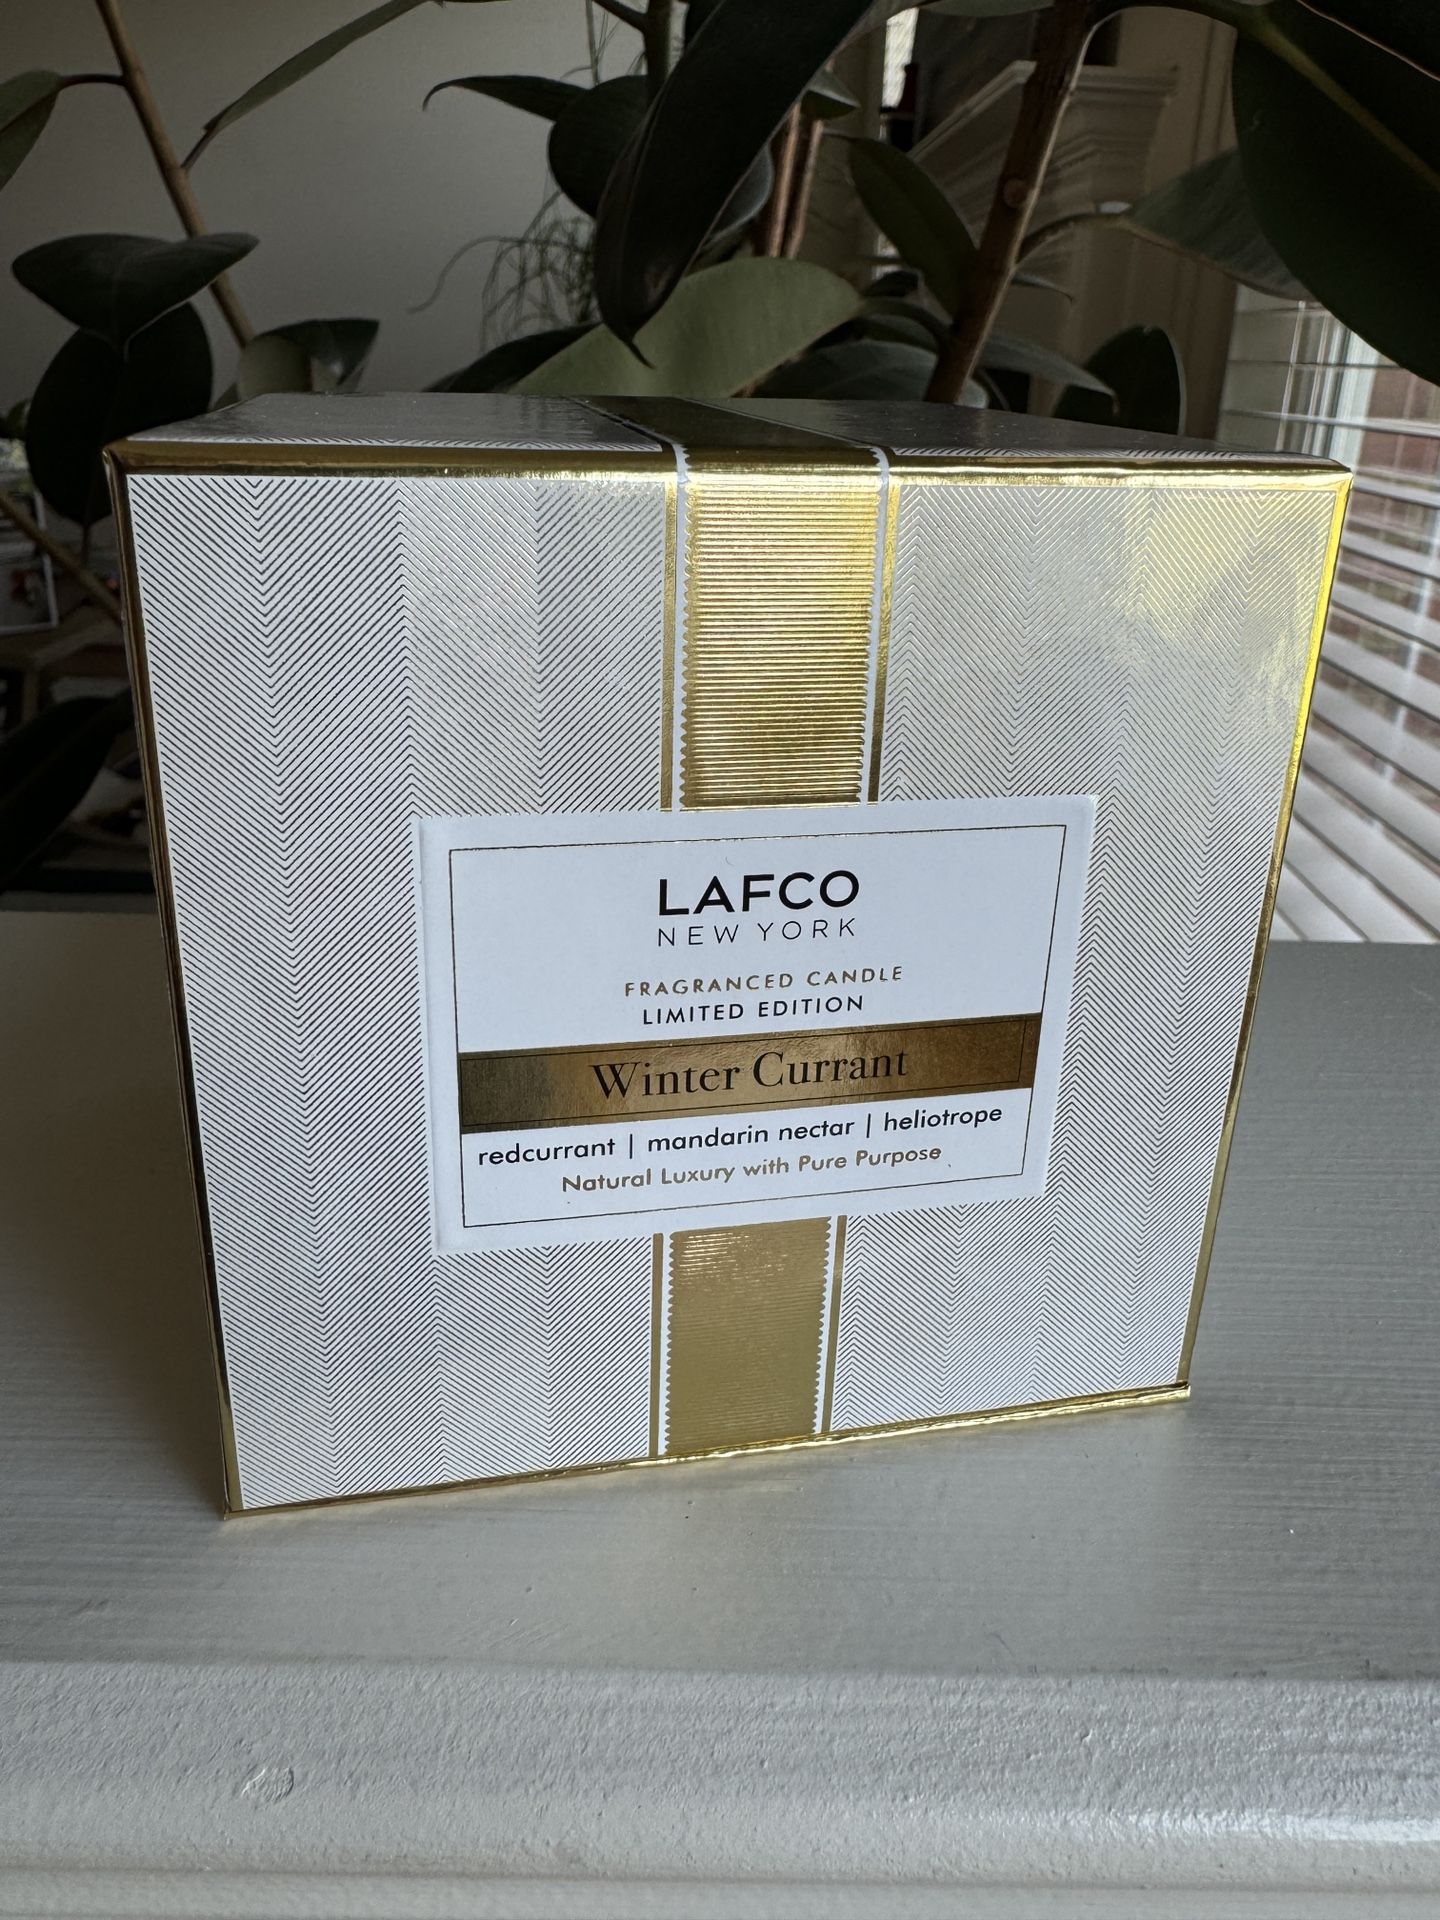 LAFCO Winter Currant Candle 6.5 oz NEW IN BOX Retail $59